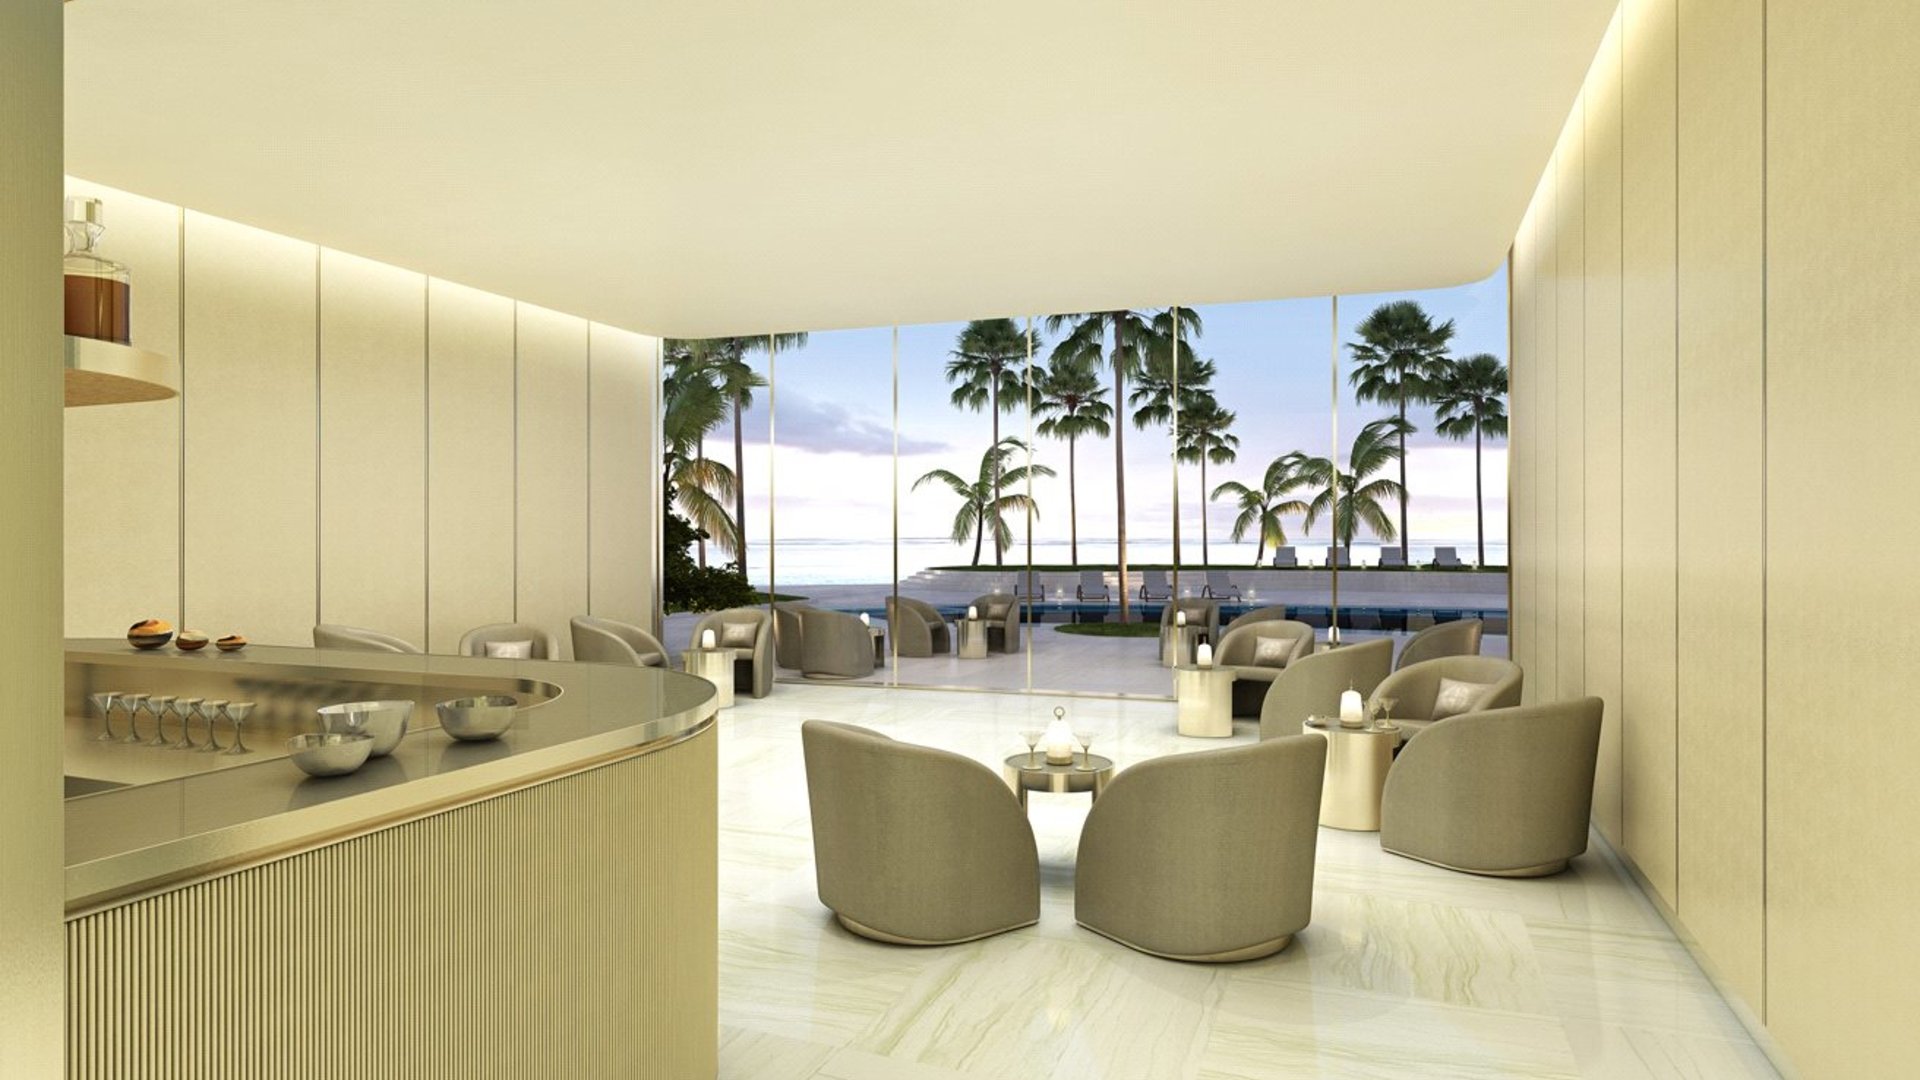 The Residences by Armani Casa project include